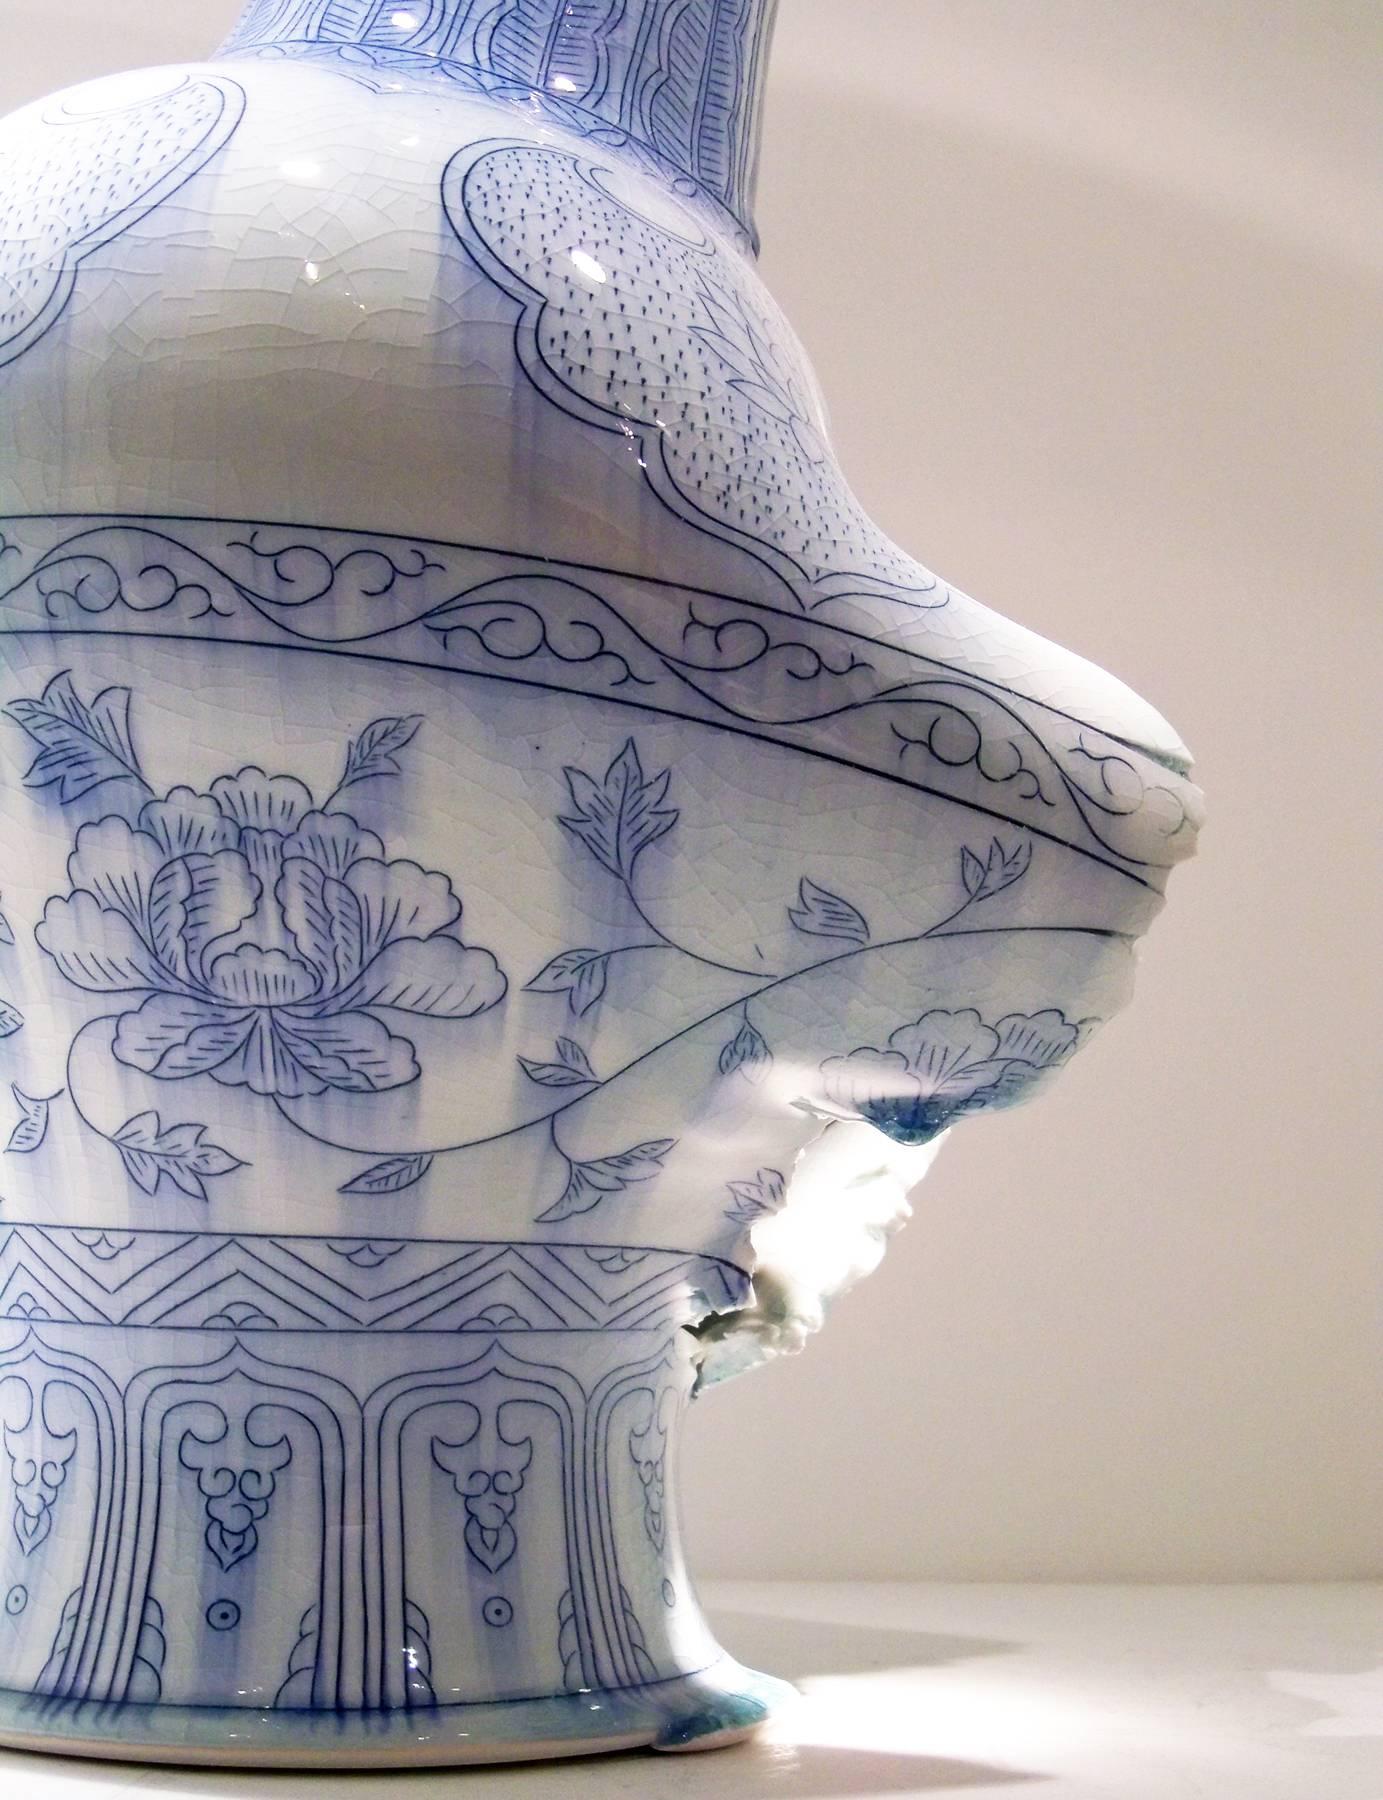 Vase with Banded Decoration by Steven Young Lee, Porcelain with Cobalt and Glaze 2